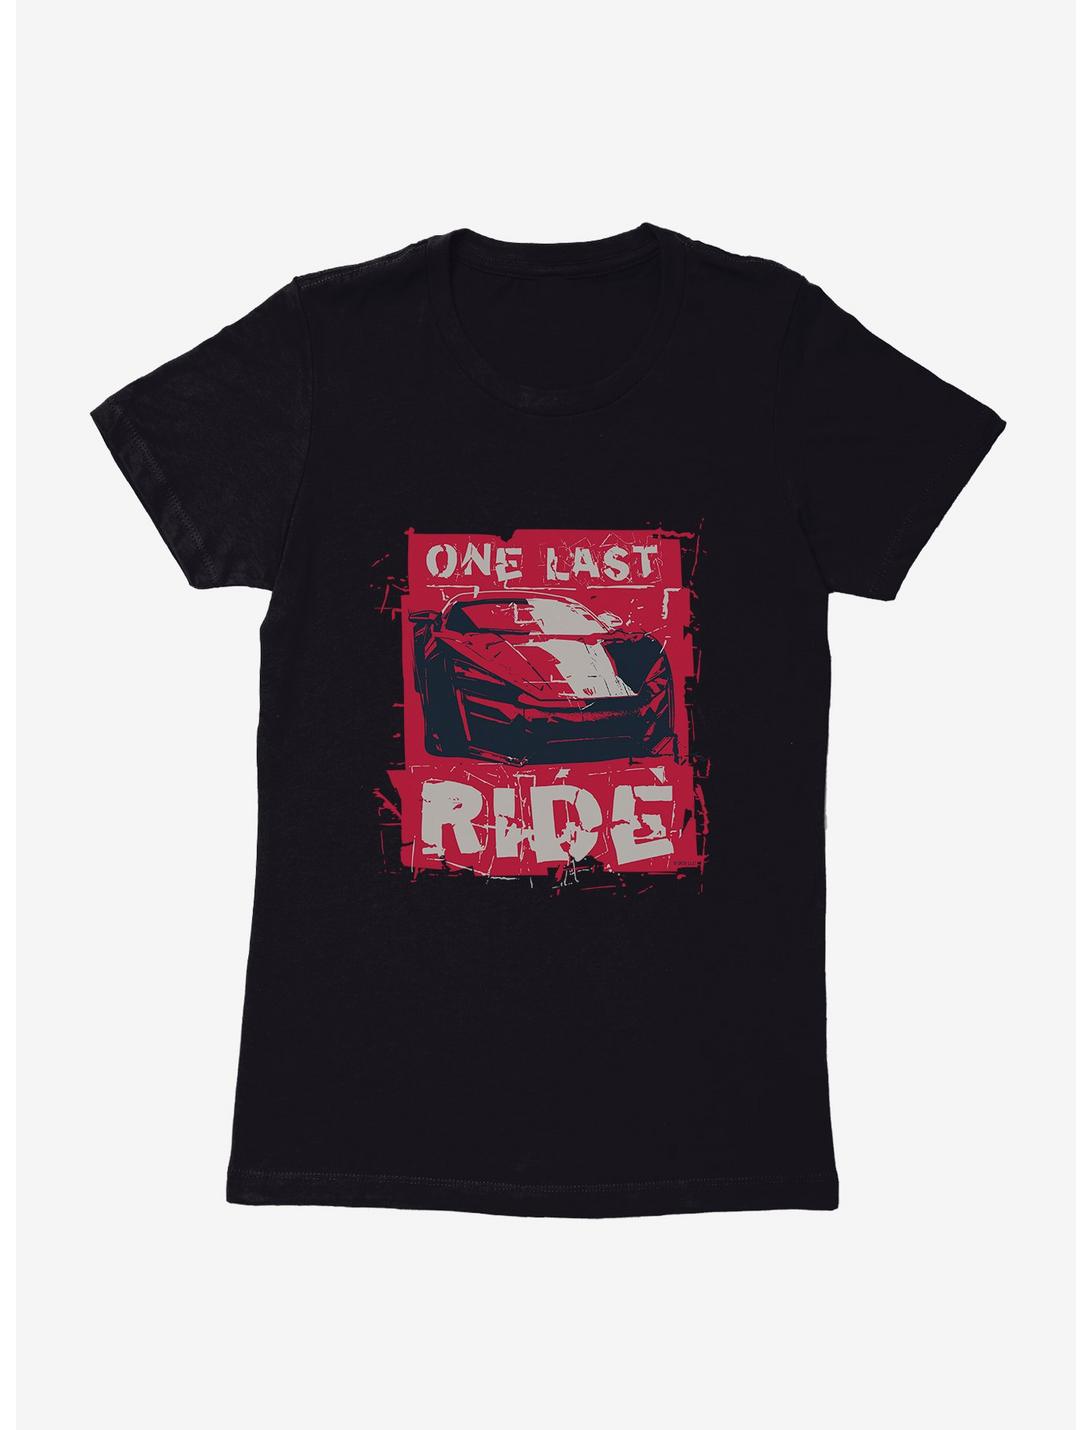 Fast & Furious One Last Ride Shatter Womens T-Shirt, BLACK, hi-res